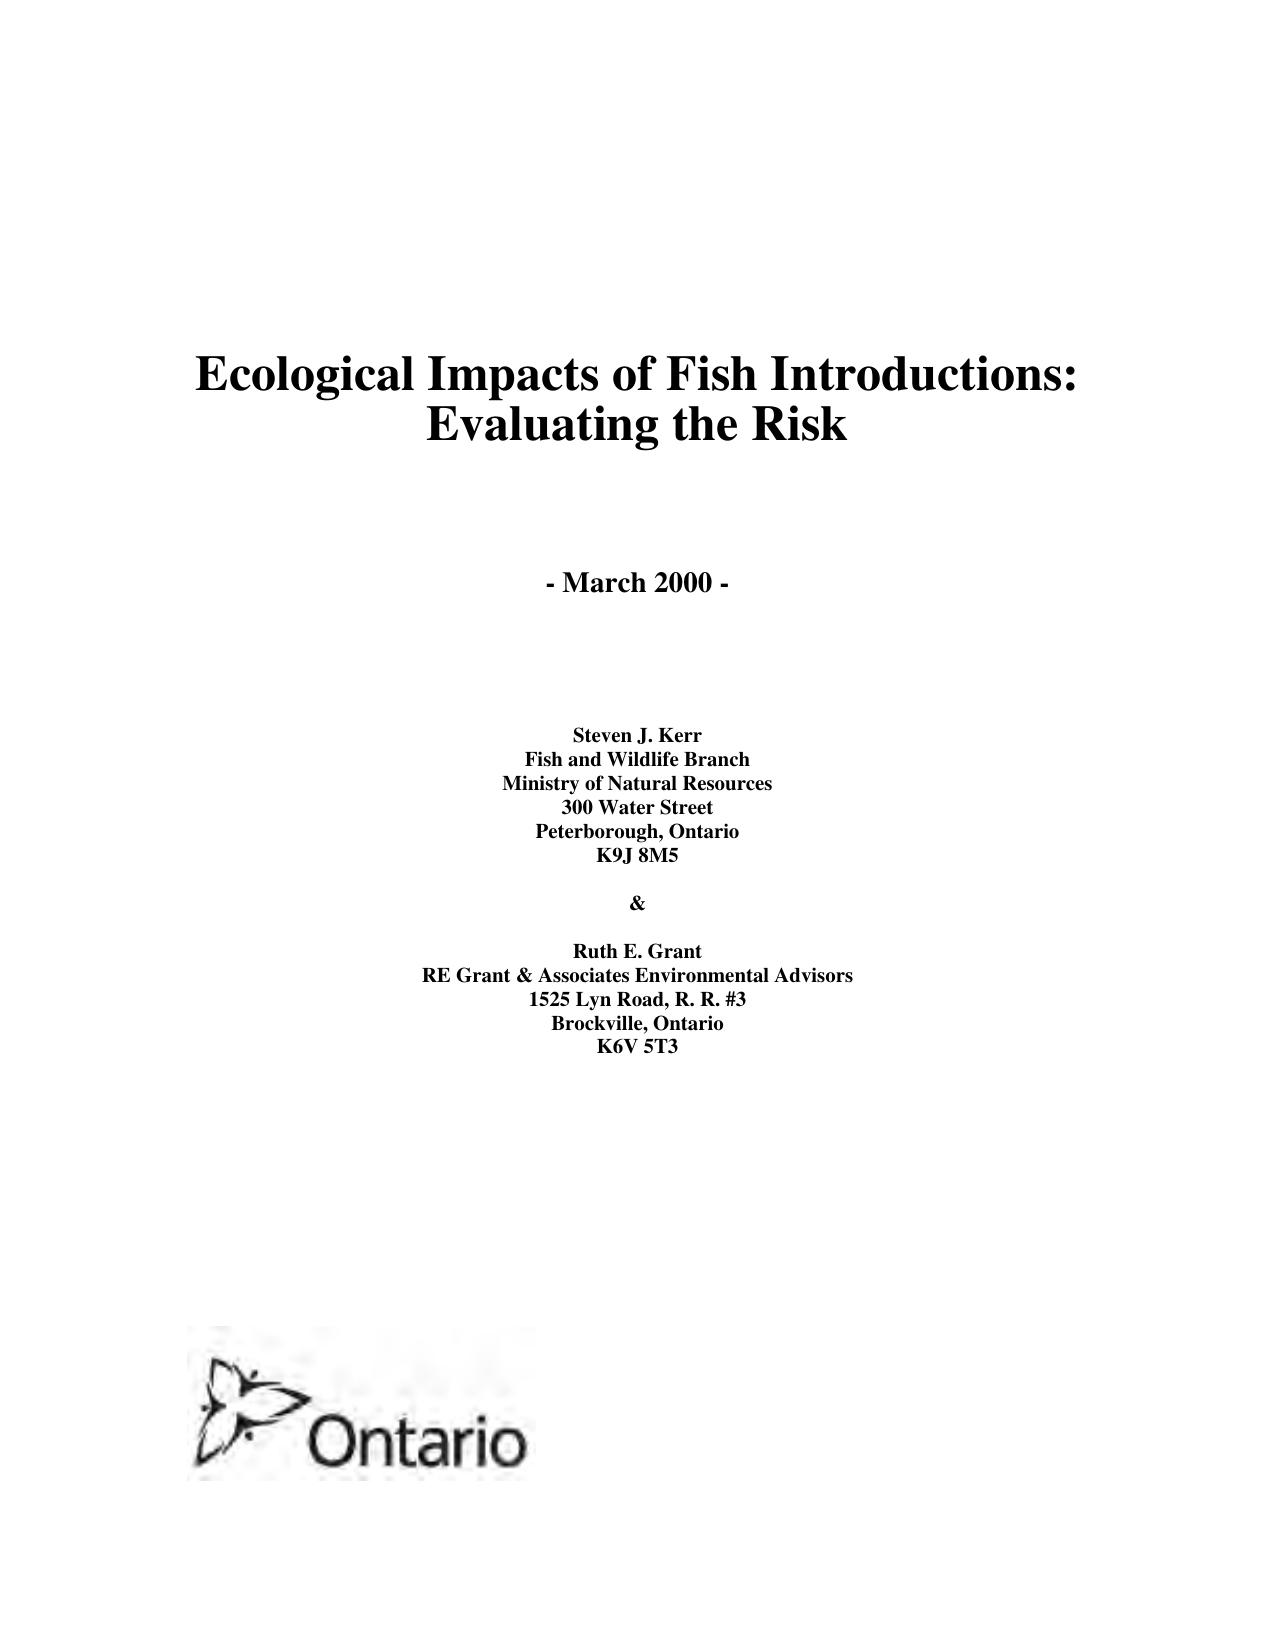 Ecological Impacts of Fish Introductions: Evaluating the Risk